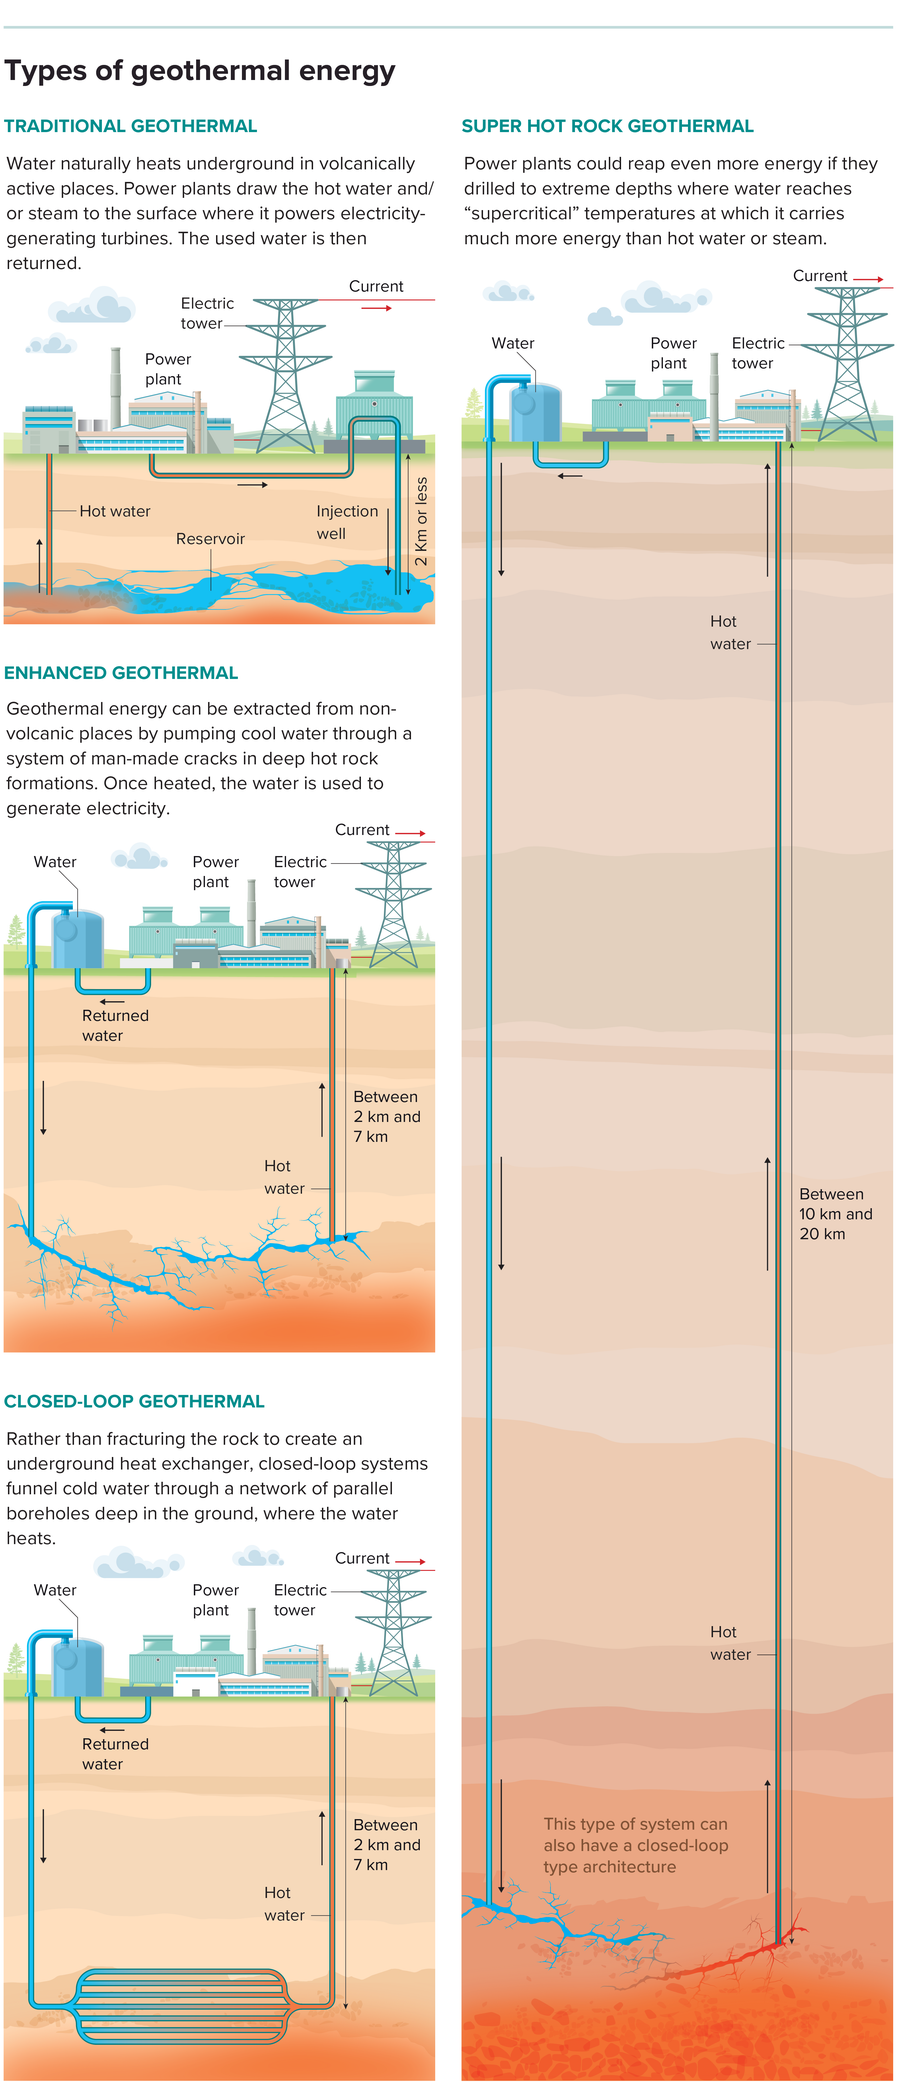 New Geothermal Technology Could Expand Clean Power Generation